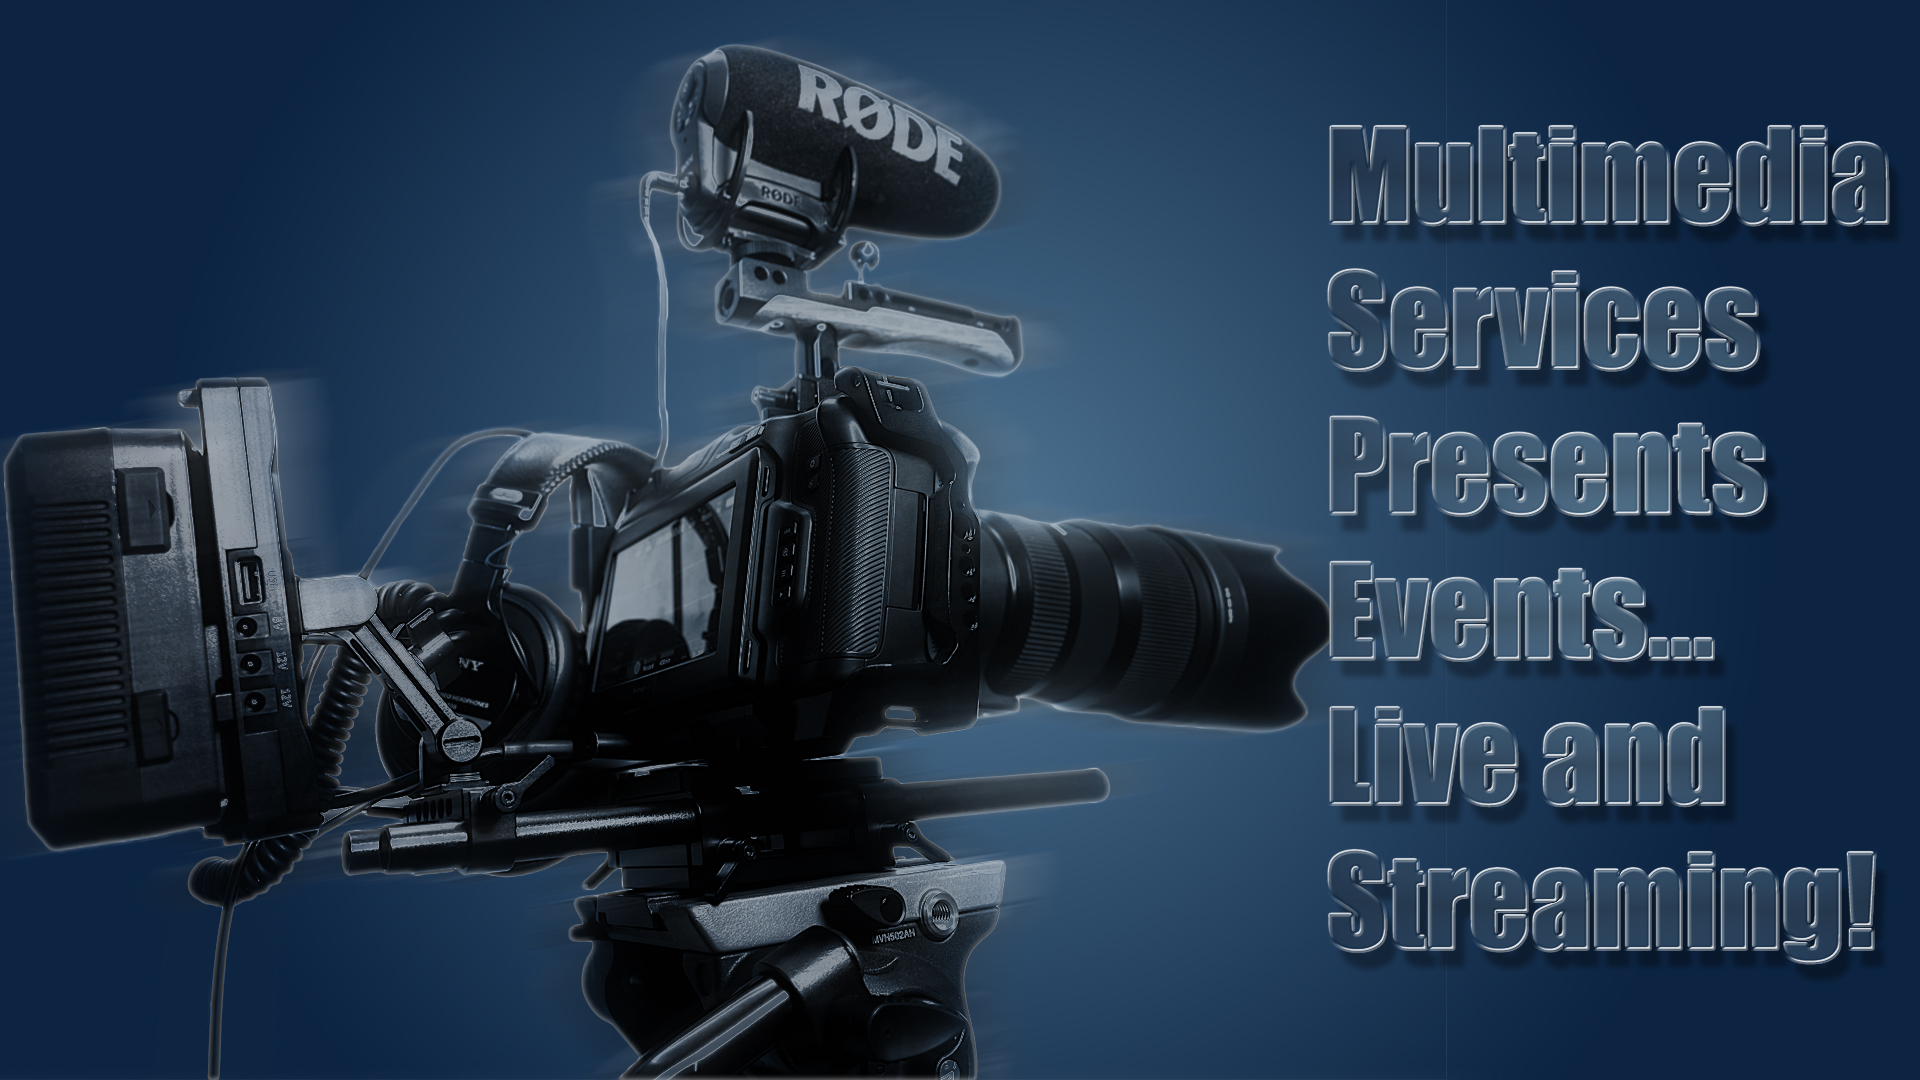 Image of a video camera setup, complete with microphone and headphones set against a navy blue background with the words "Multimedia Services Presents Events... Live and Streaming!" along the right side.